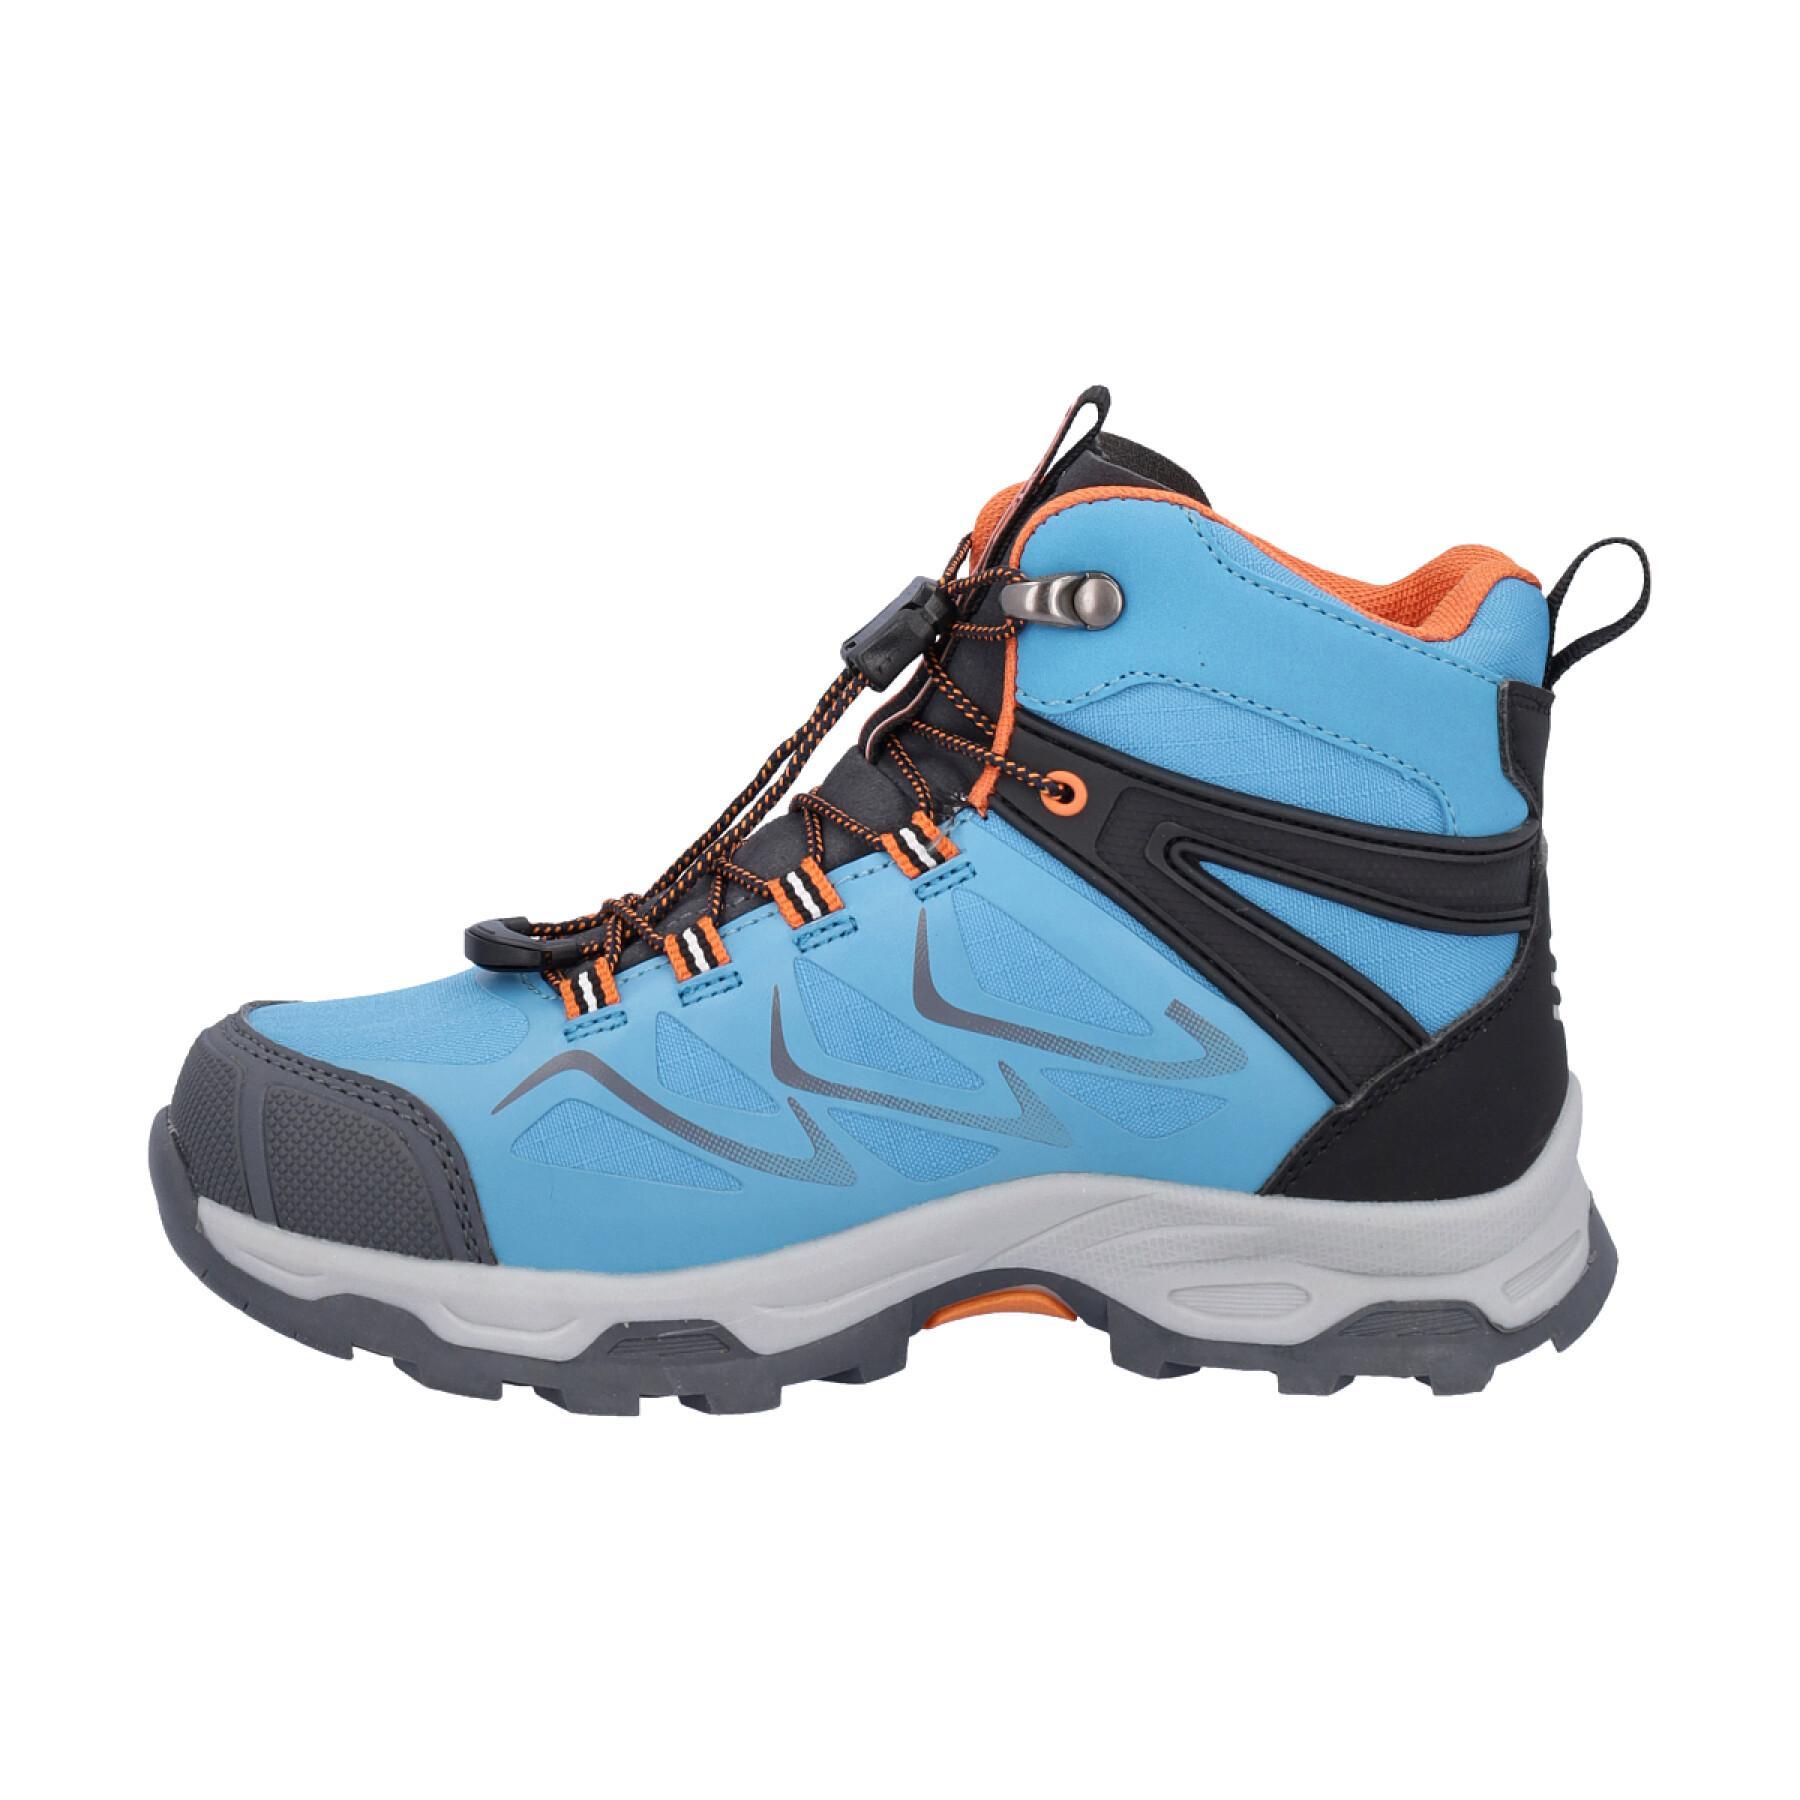 Mid hiking shoes for children CMP Byne Waterproof